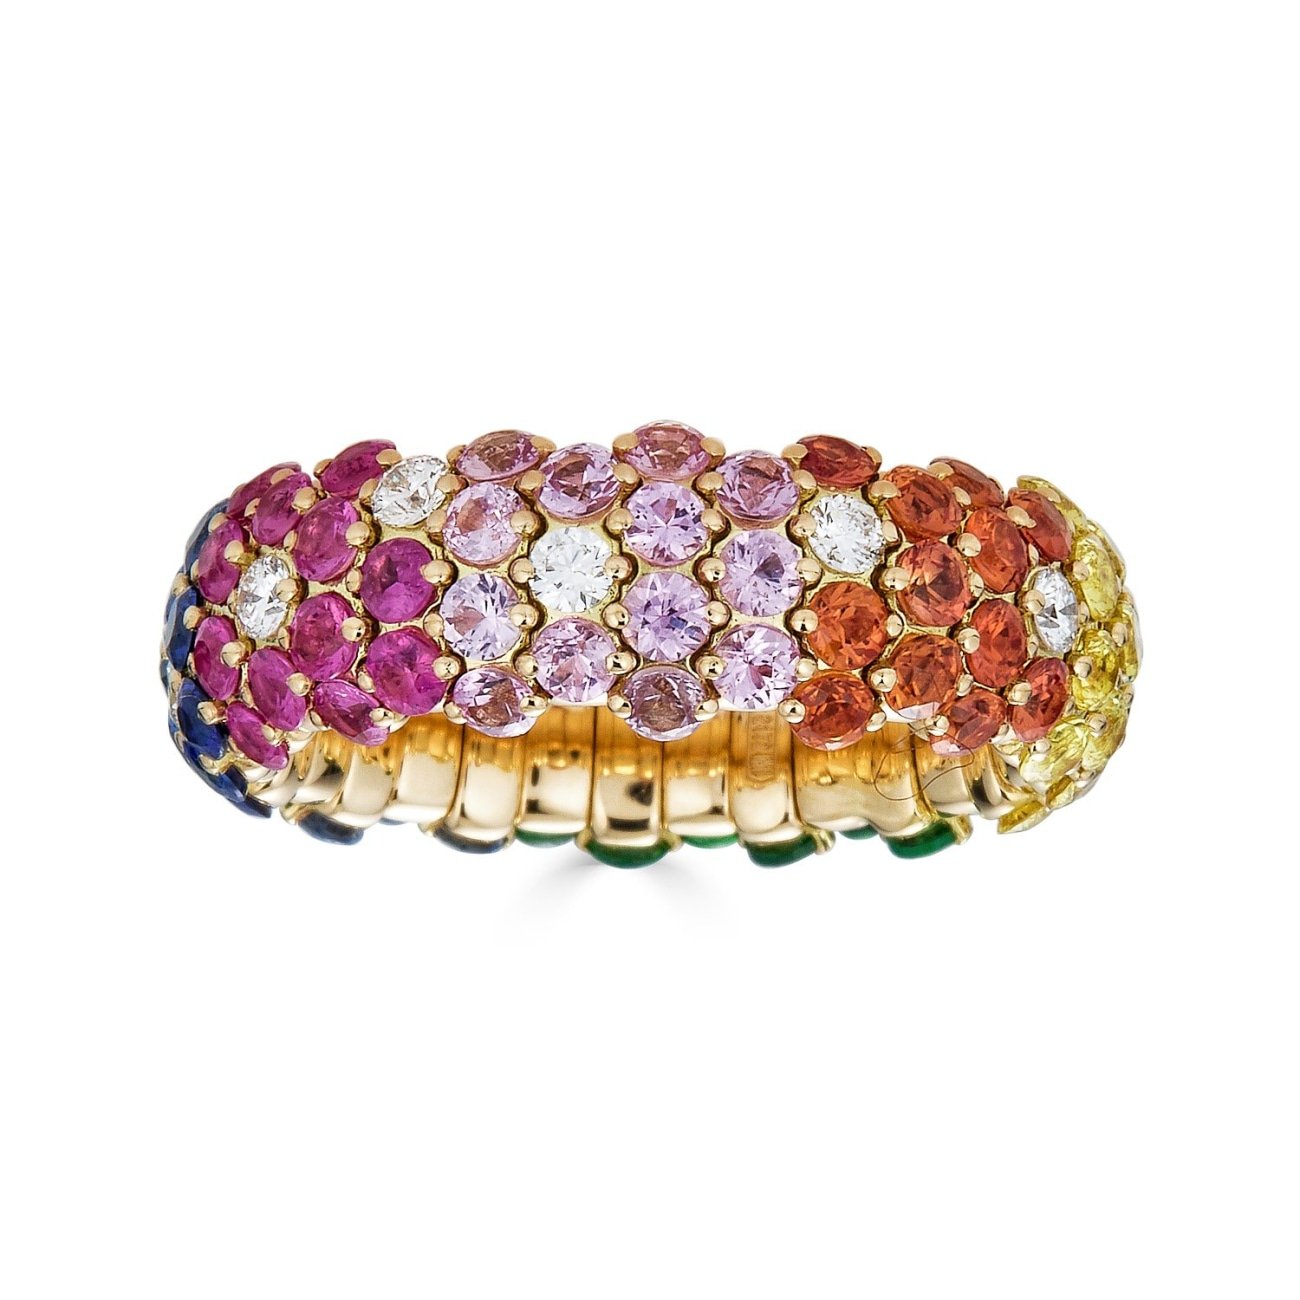 https://www.manfredijewels.com/collections/jewelry/products/rainbow-stretch-ring-in-18kt-yellow-gold